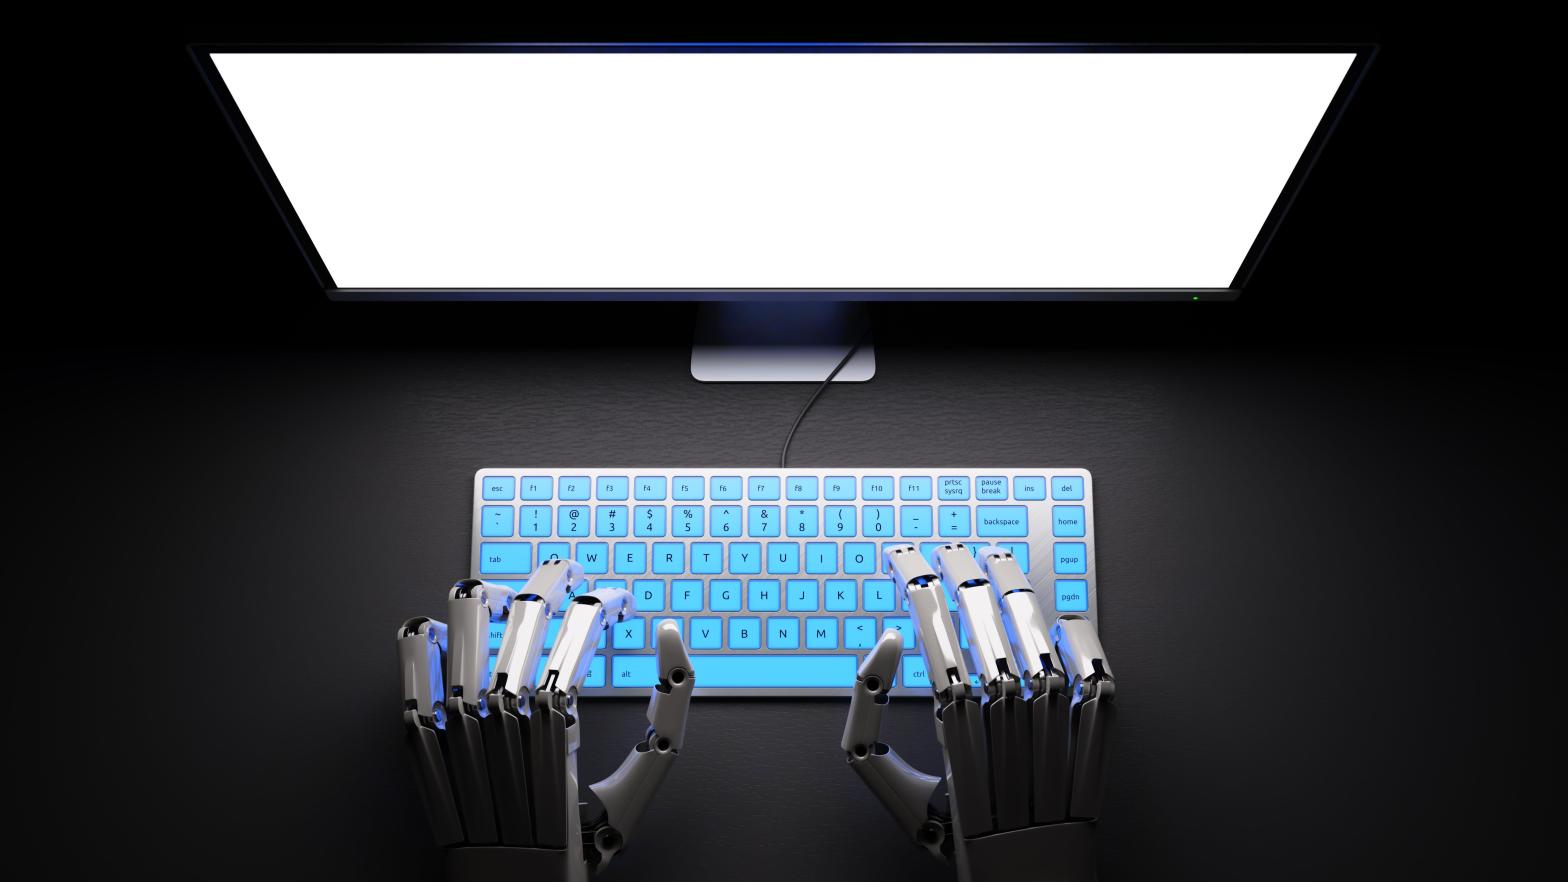 Large language models like ChatGPT have been used for all sorts of applications, from writing code to cheating on exams. Now users are flooding fiction magazine submissions with fake, AI-generated content. (Image: maxuser, Shutterstock)